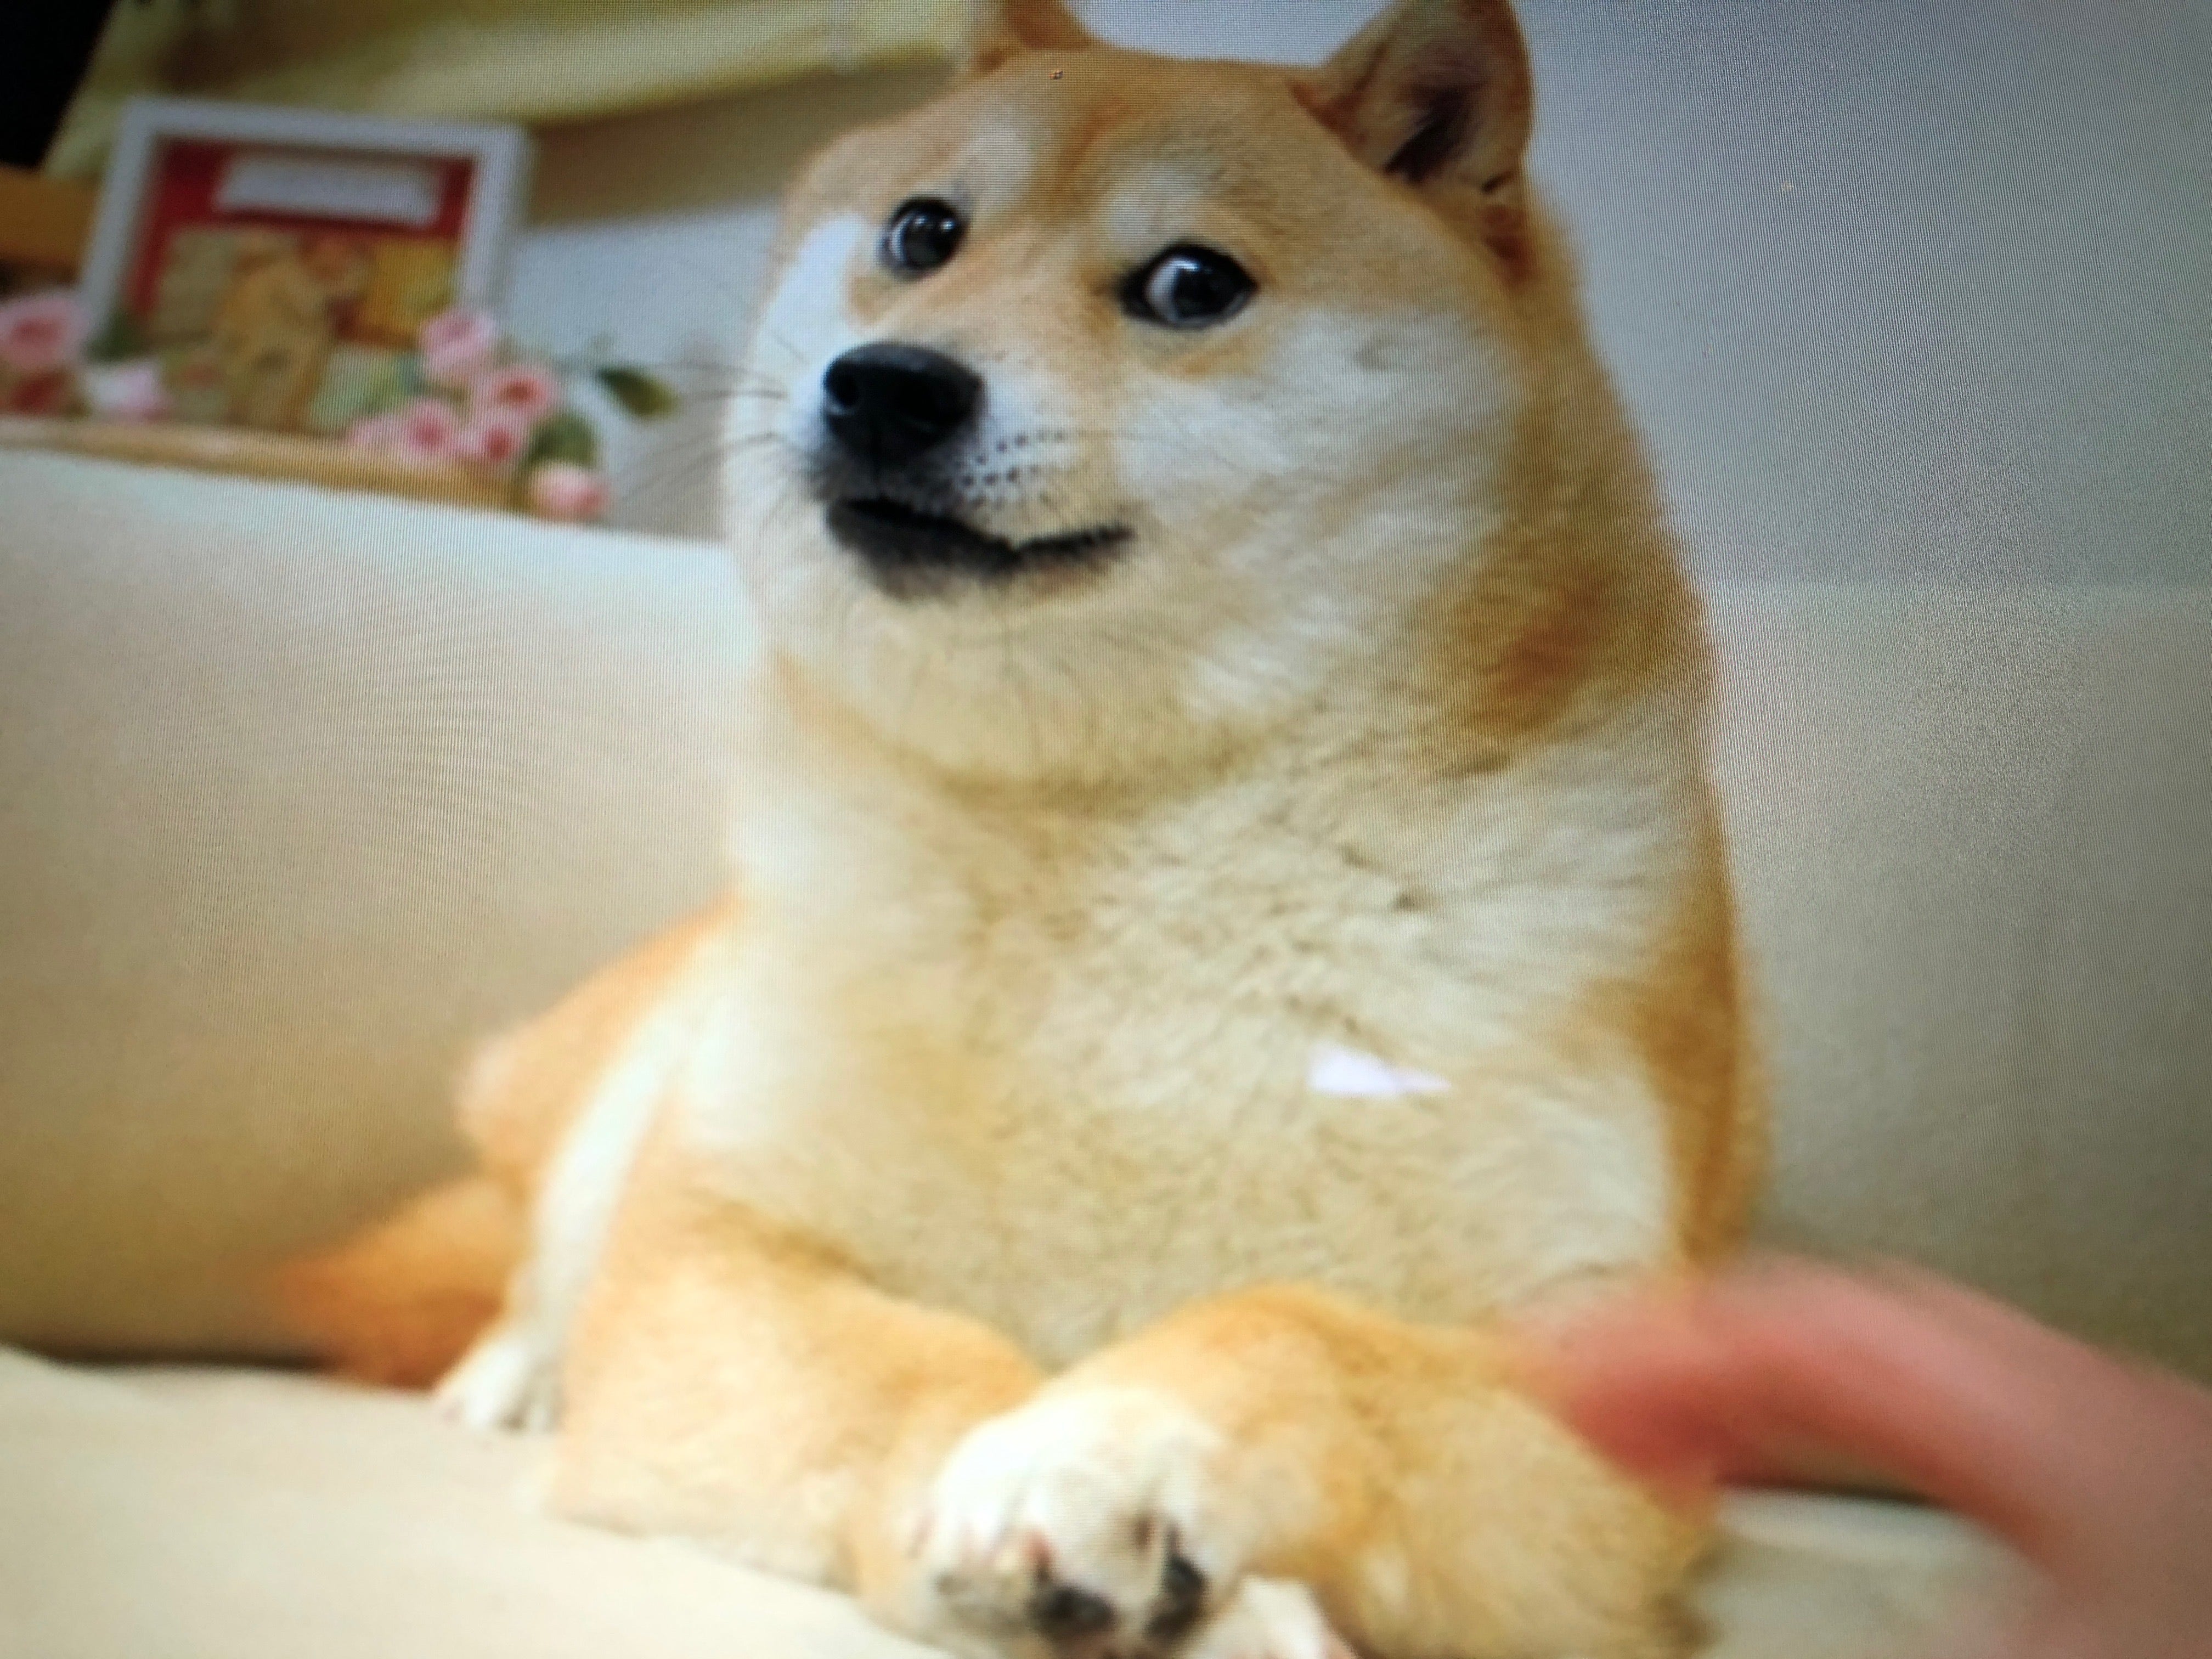 Classic Meme Behind Dogecoin To Be Available For 'Fractional Ownership' As NFT: What You Need To Know